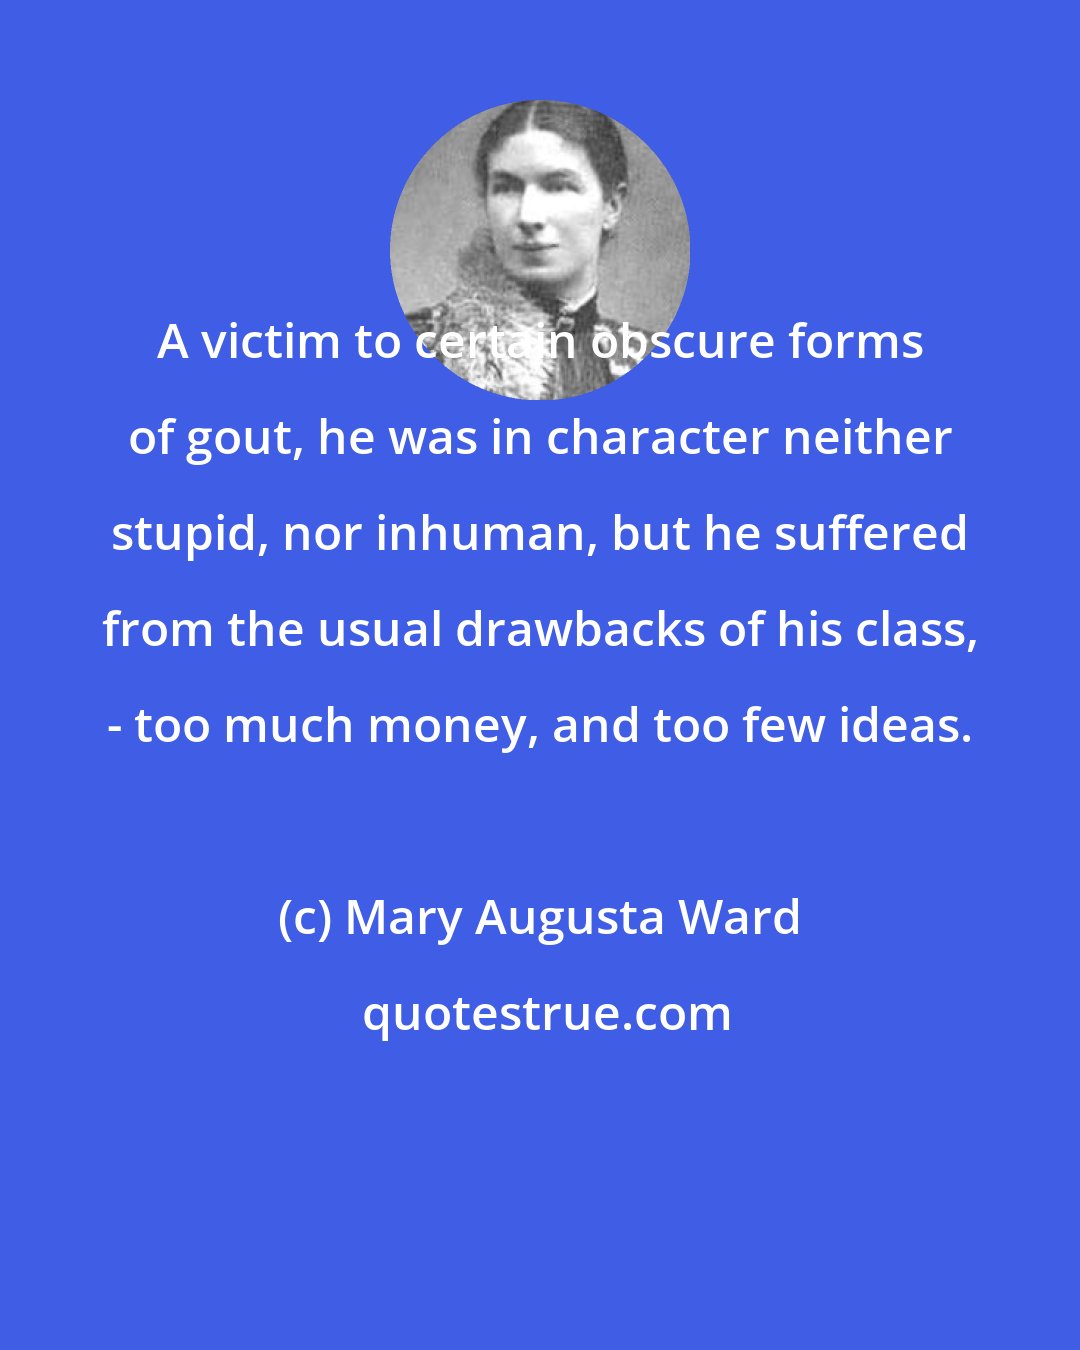 Mary Augusta Ward: A victim to certain obscure forms of gout, he was in character neither stupid, nor inhuman, but he suffered from the usual drawbacks of his class, - too much money, and too few ideas.